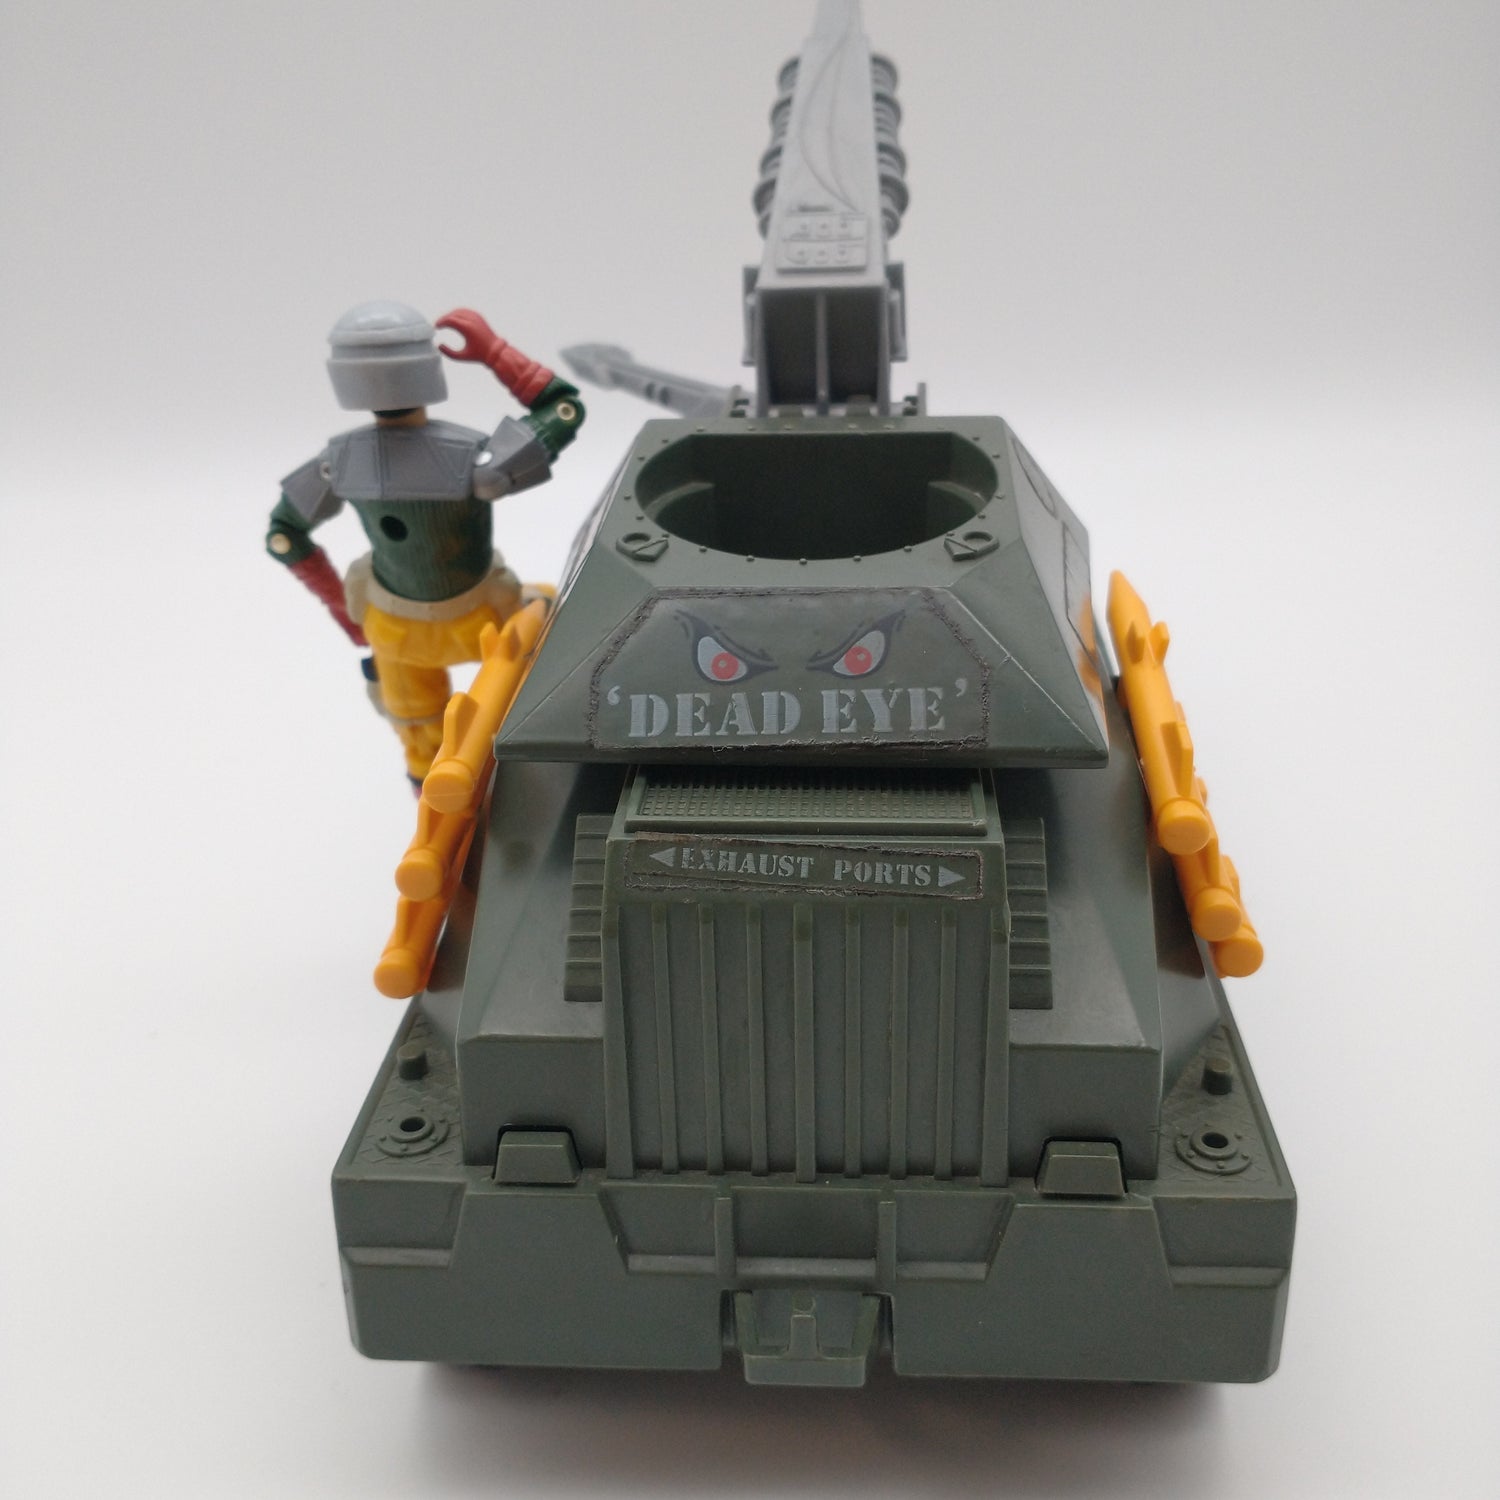 The back of the tank and figure